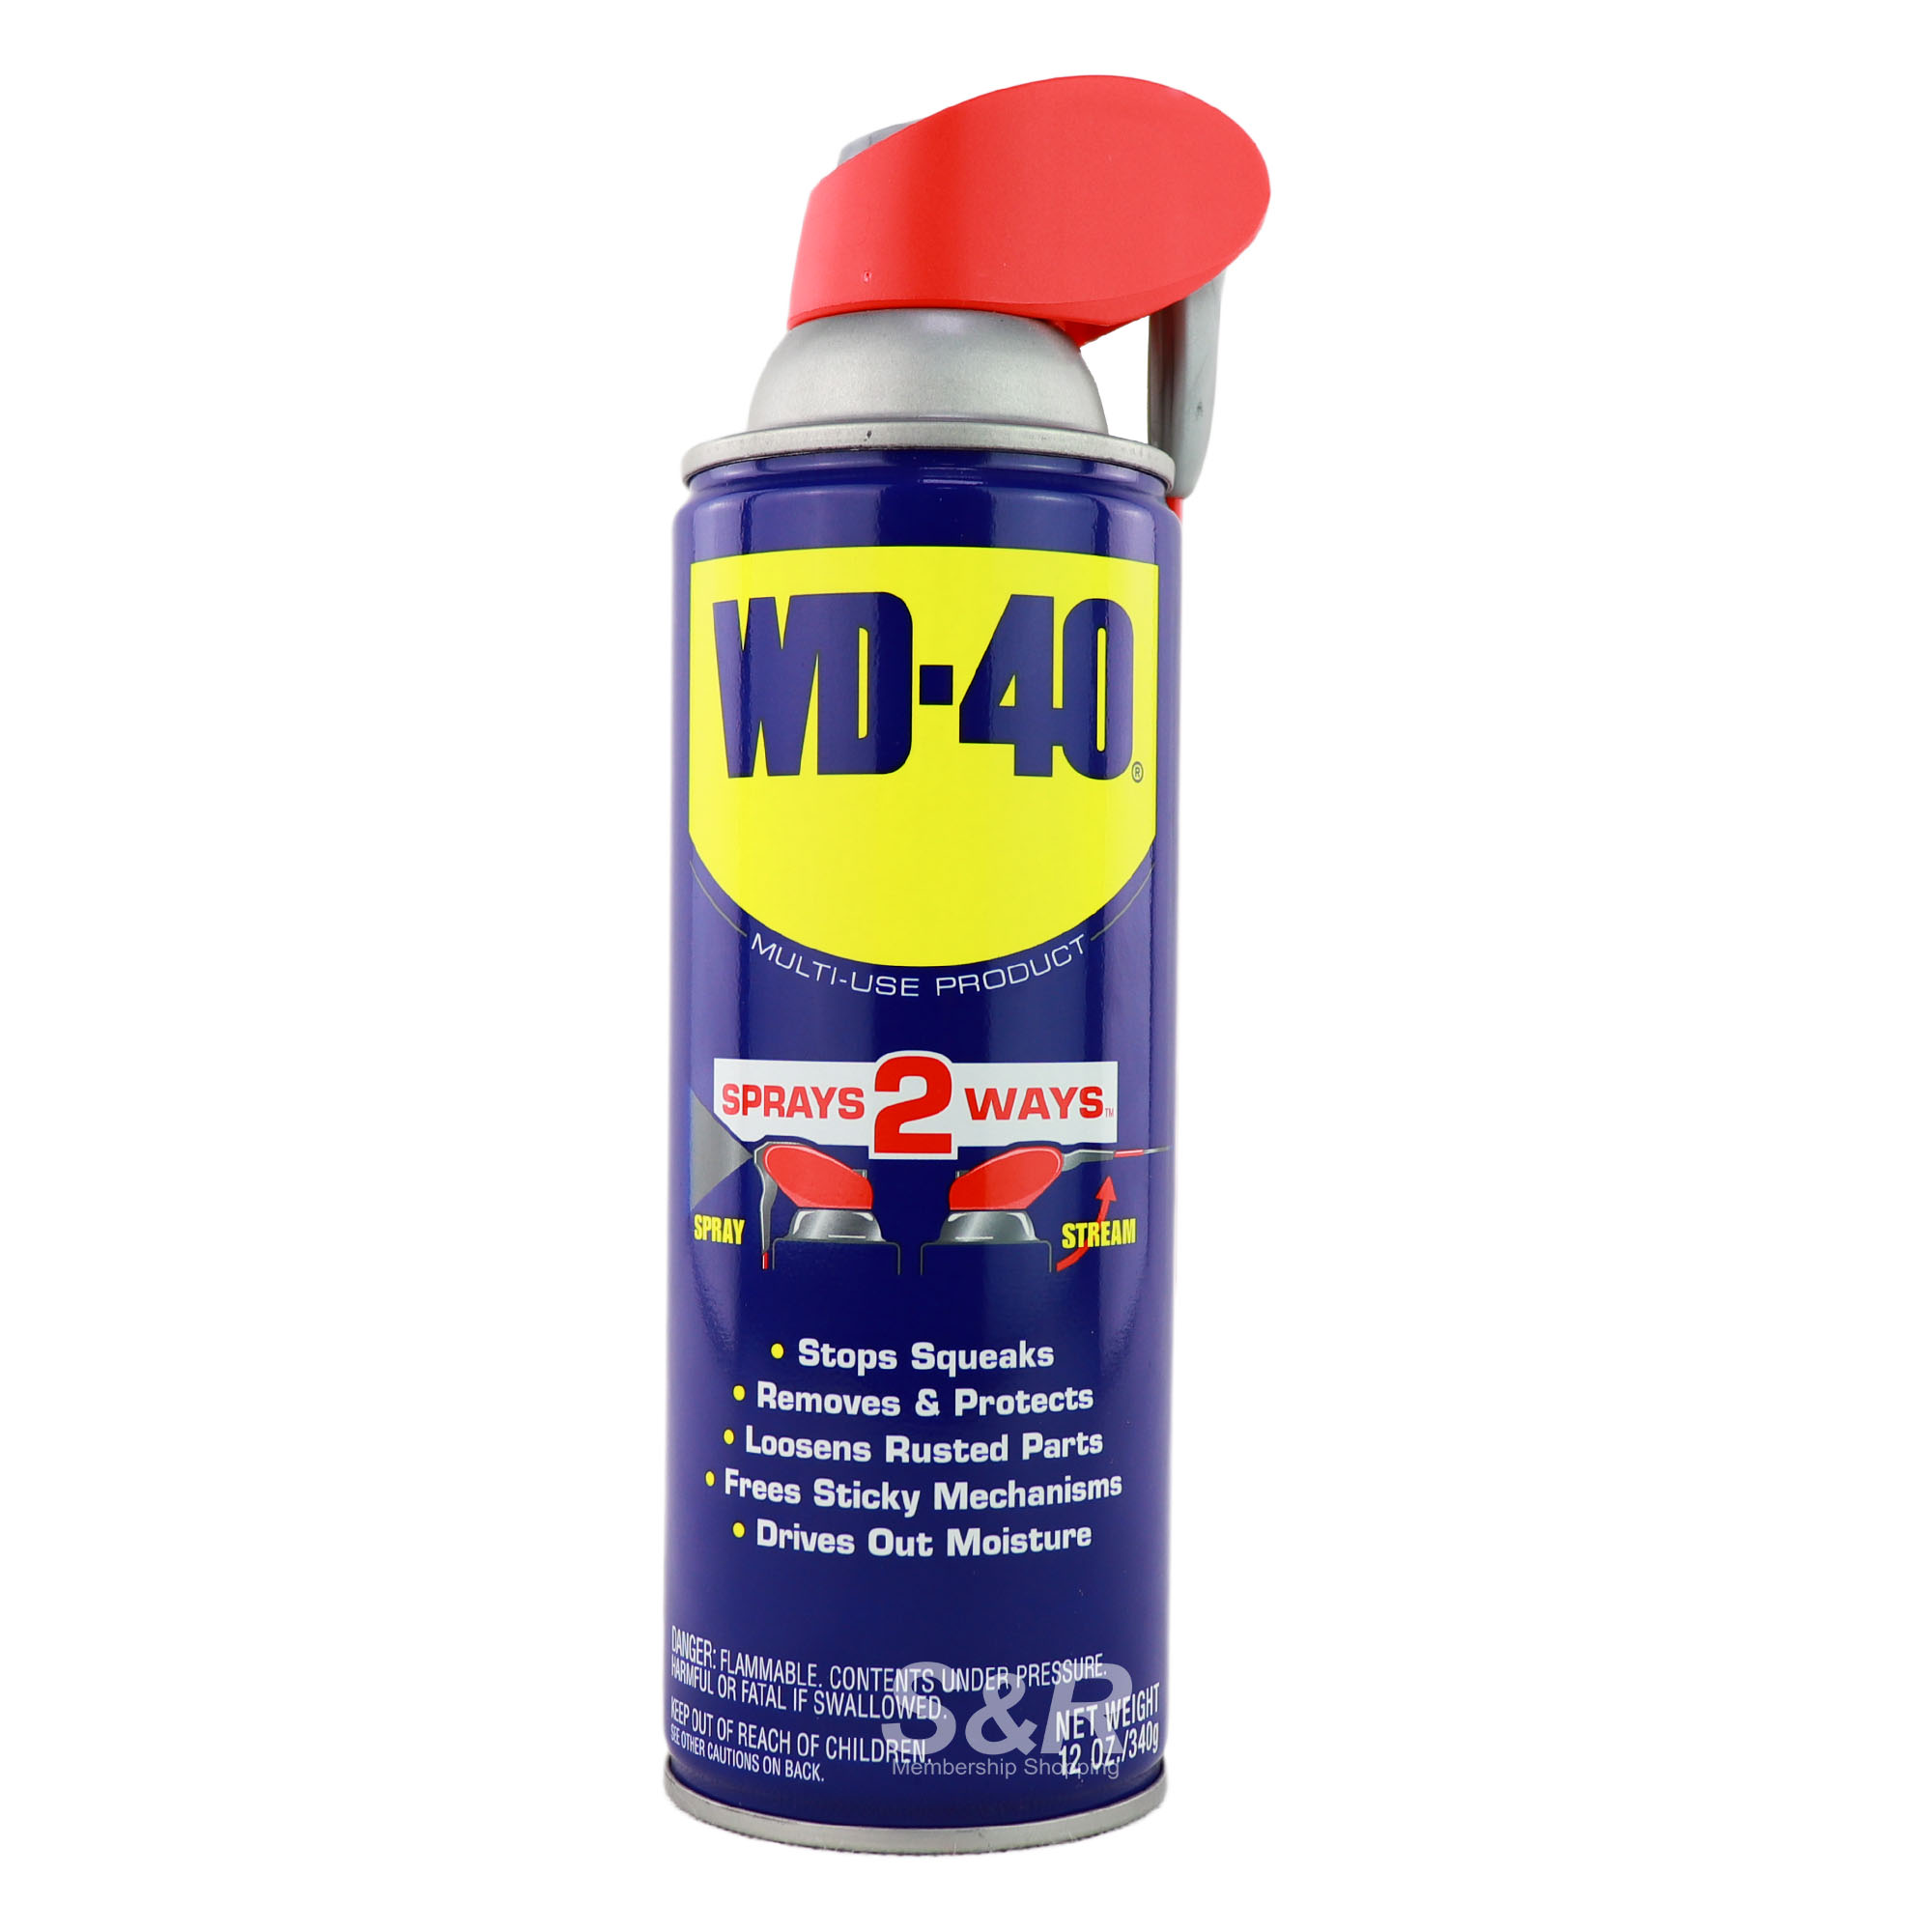 WD-40 Multi-Use Product 340g